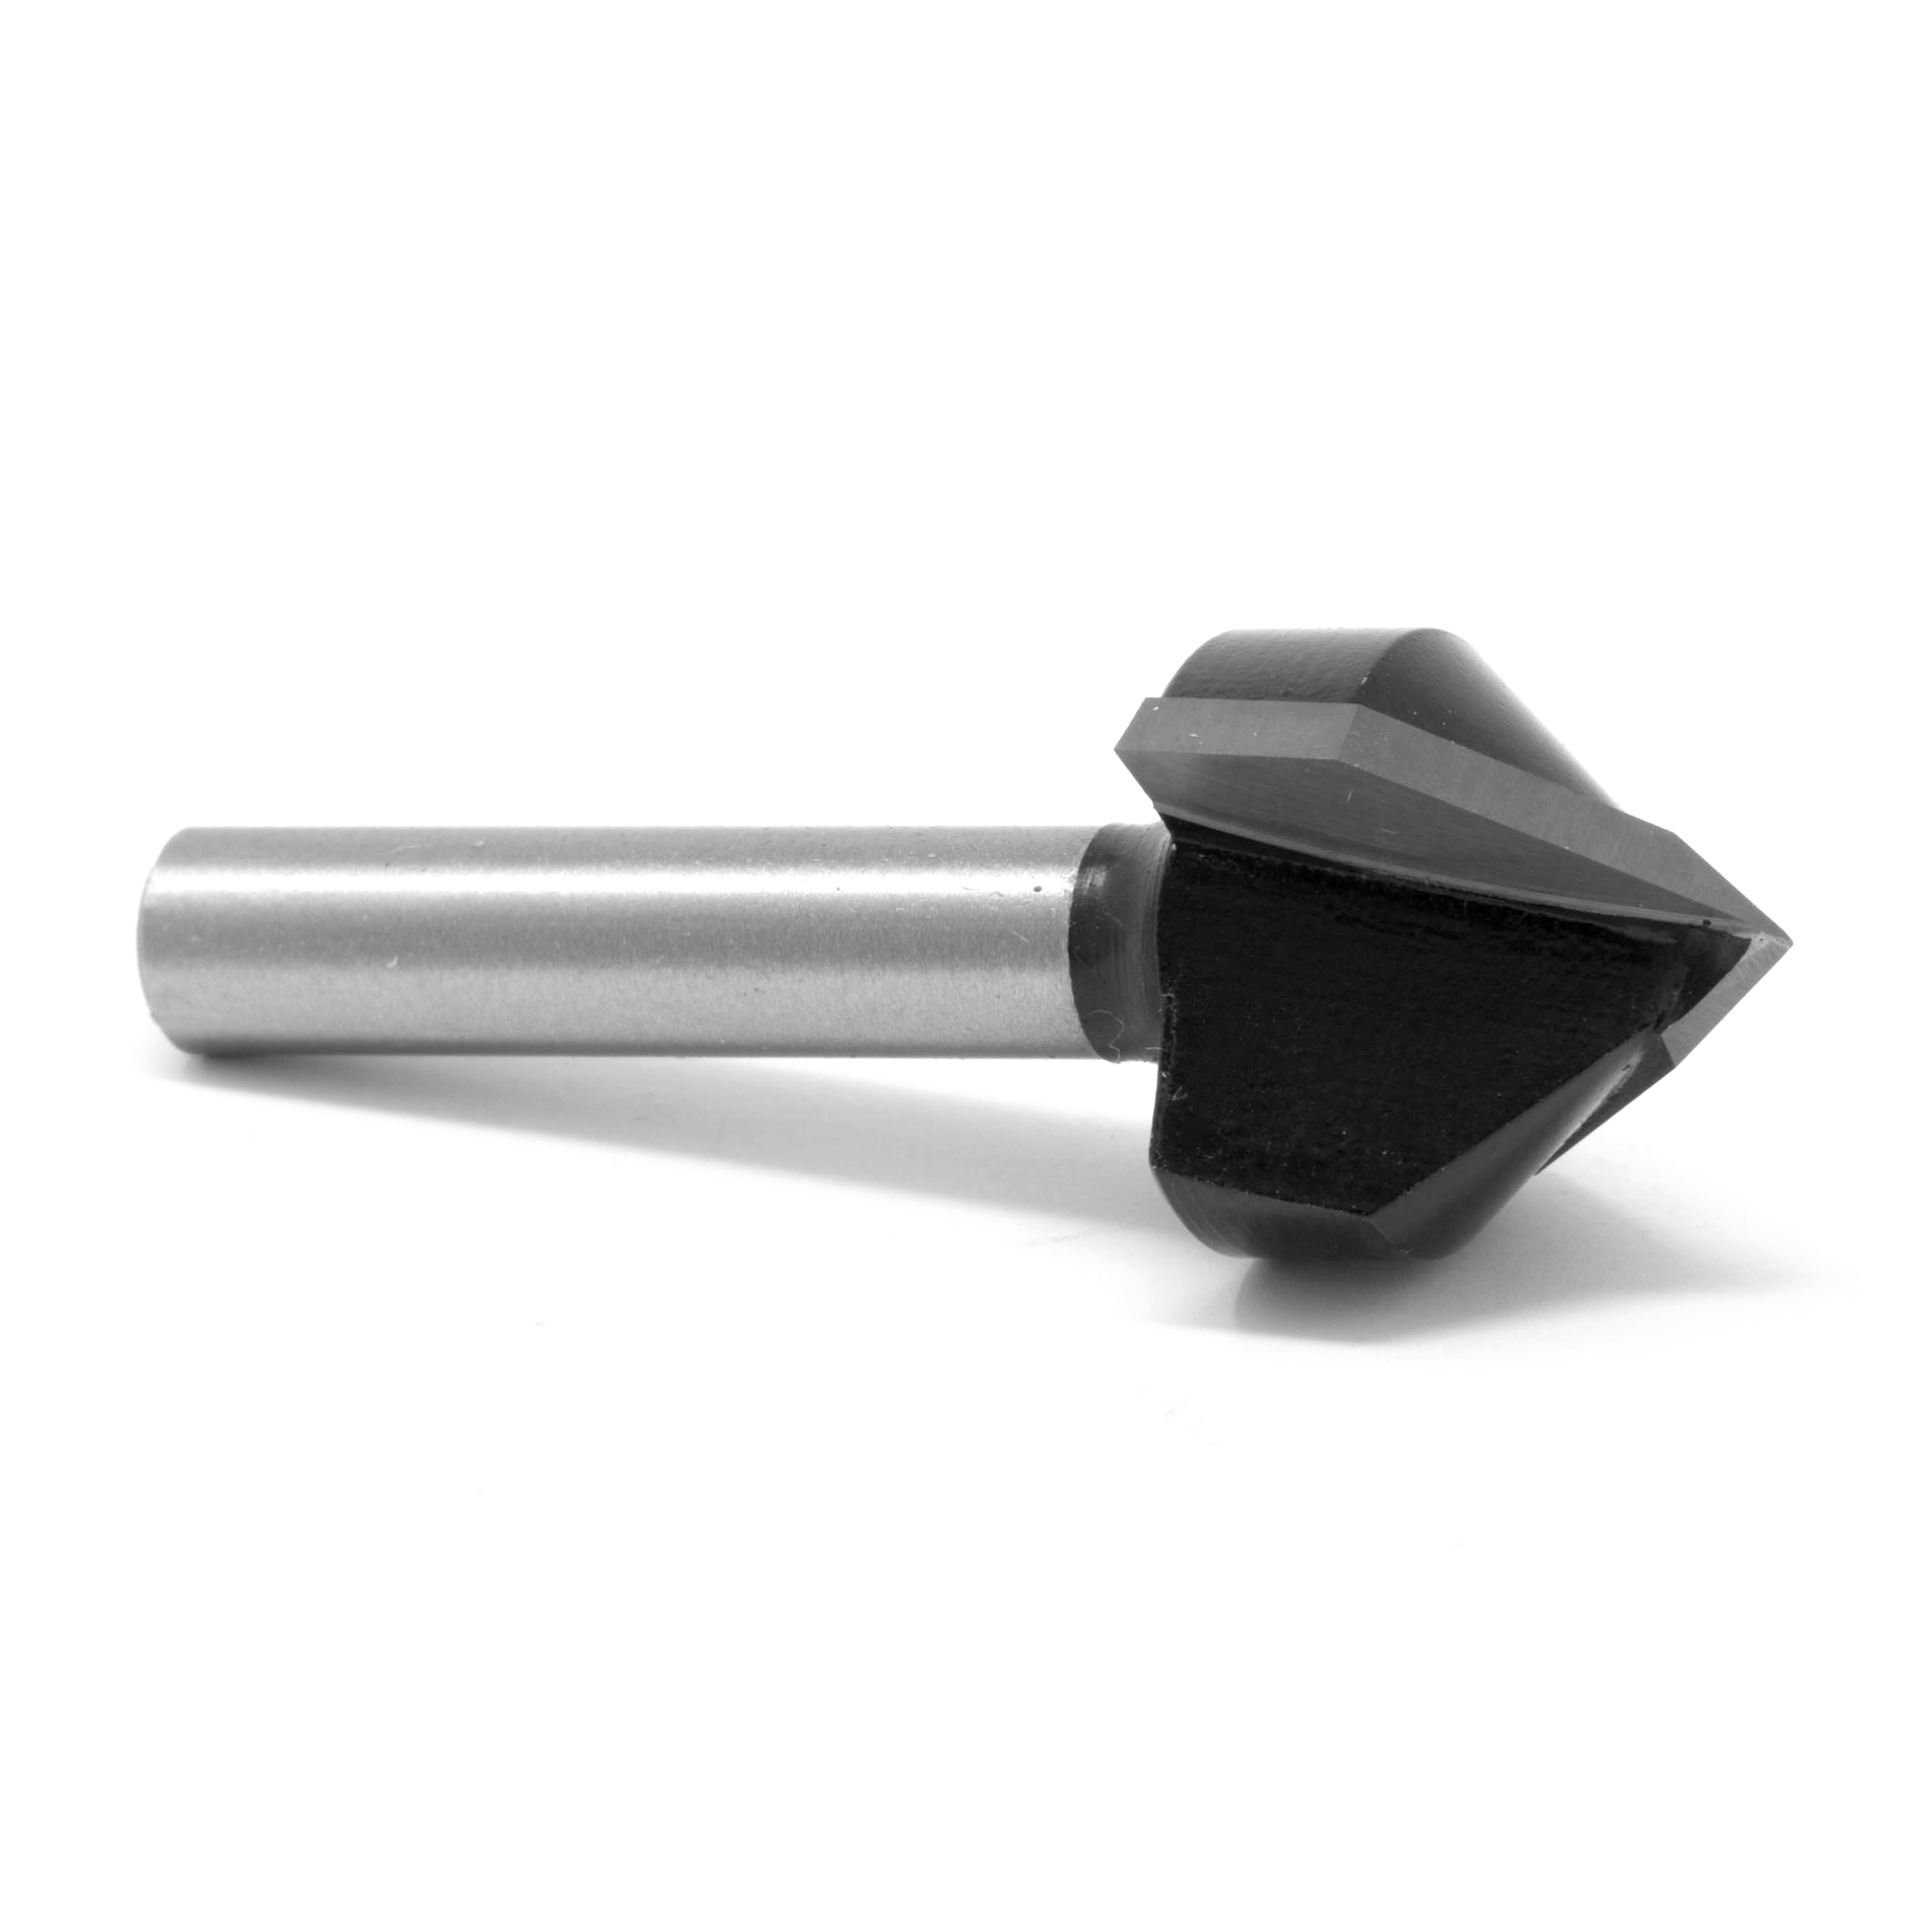 WEN, 3/4Inch V-Groove Carbide-Tipped Router Bit, Shank Size 1/4 in, Bit Diameter 3/4 in, Model RB304VG